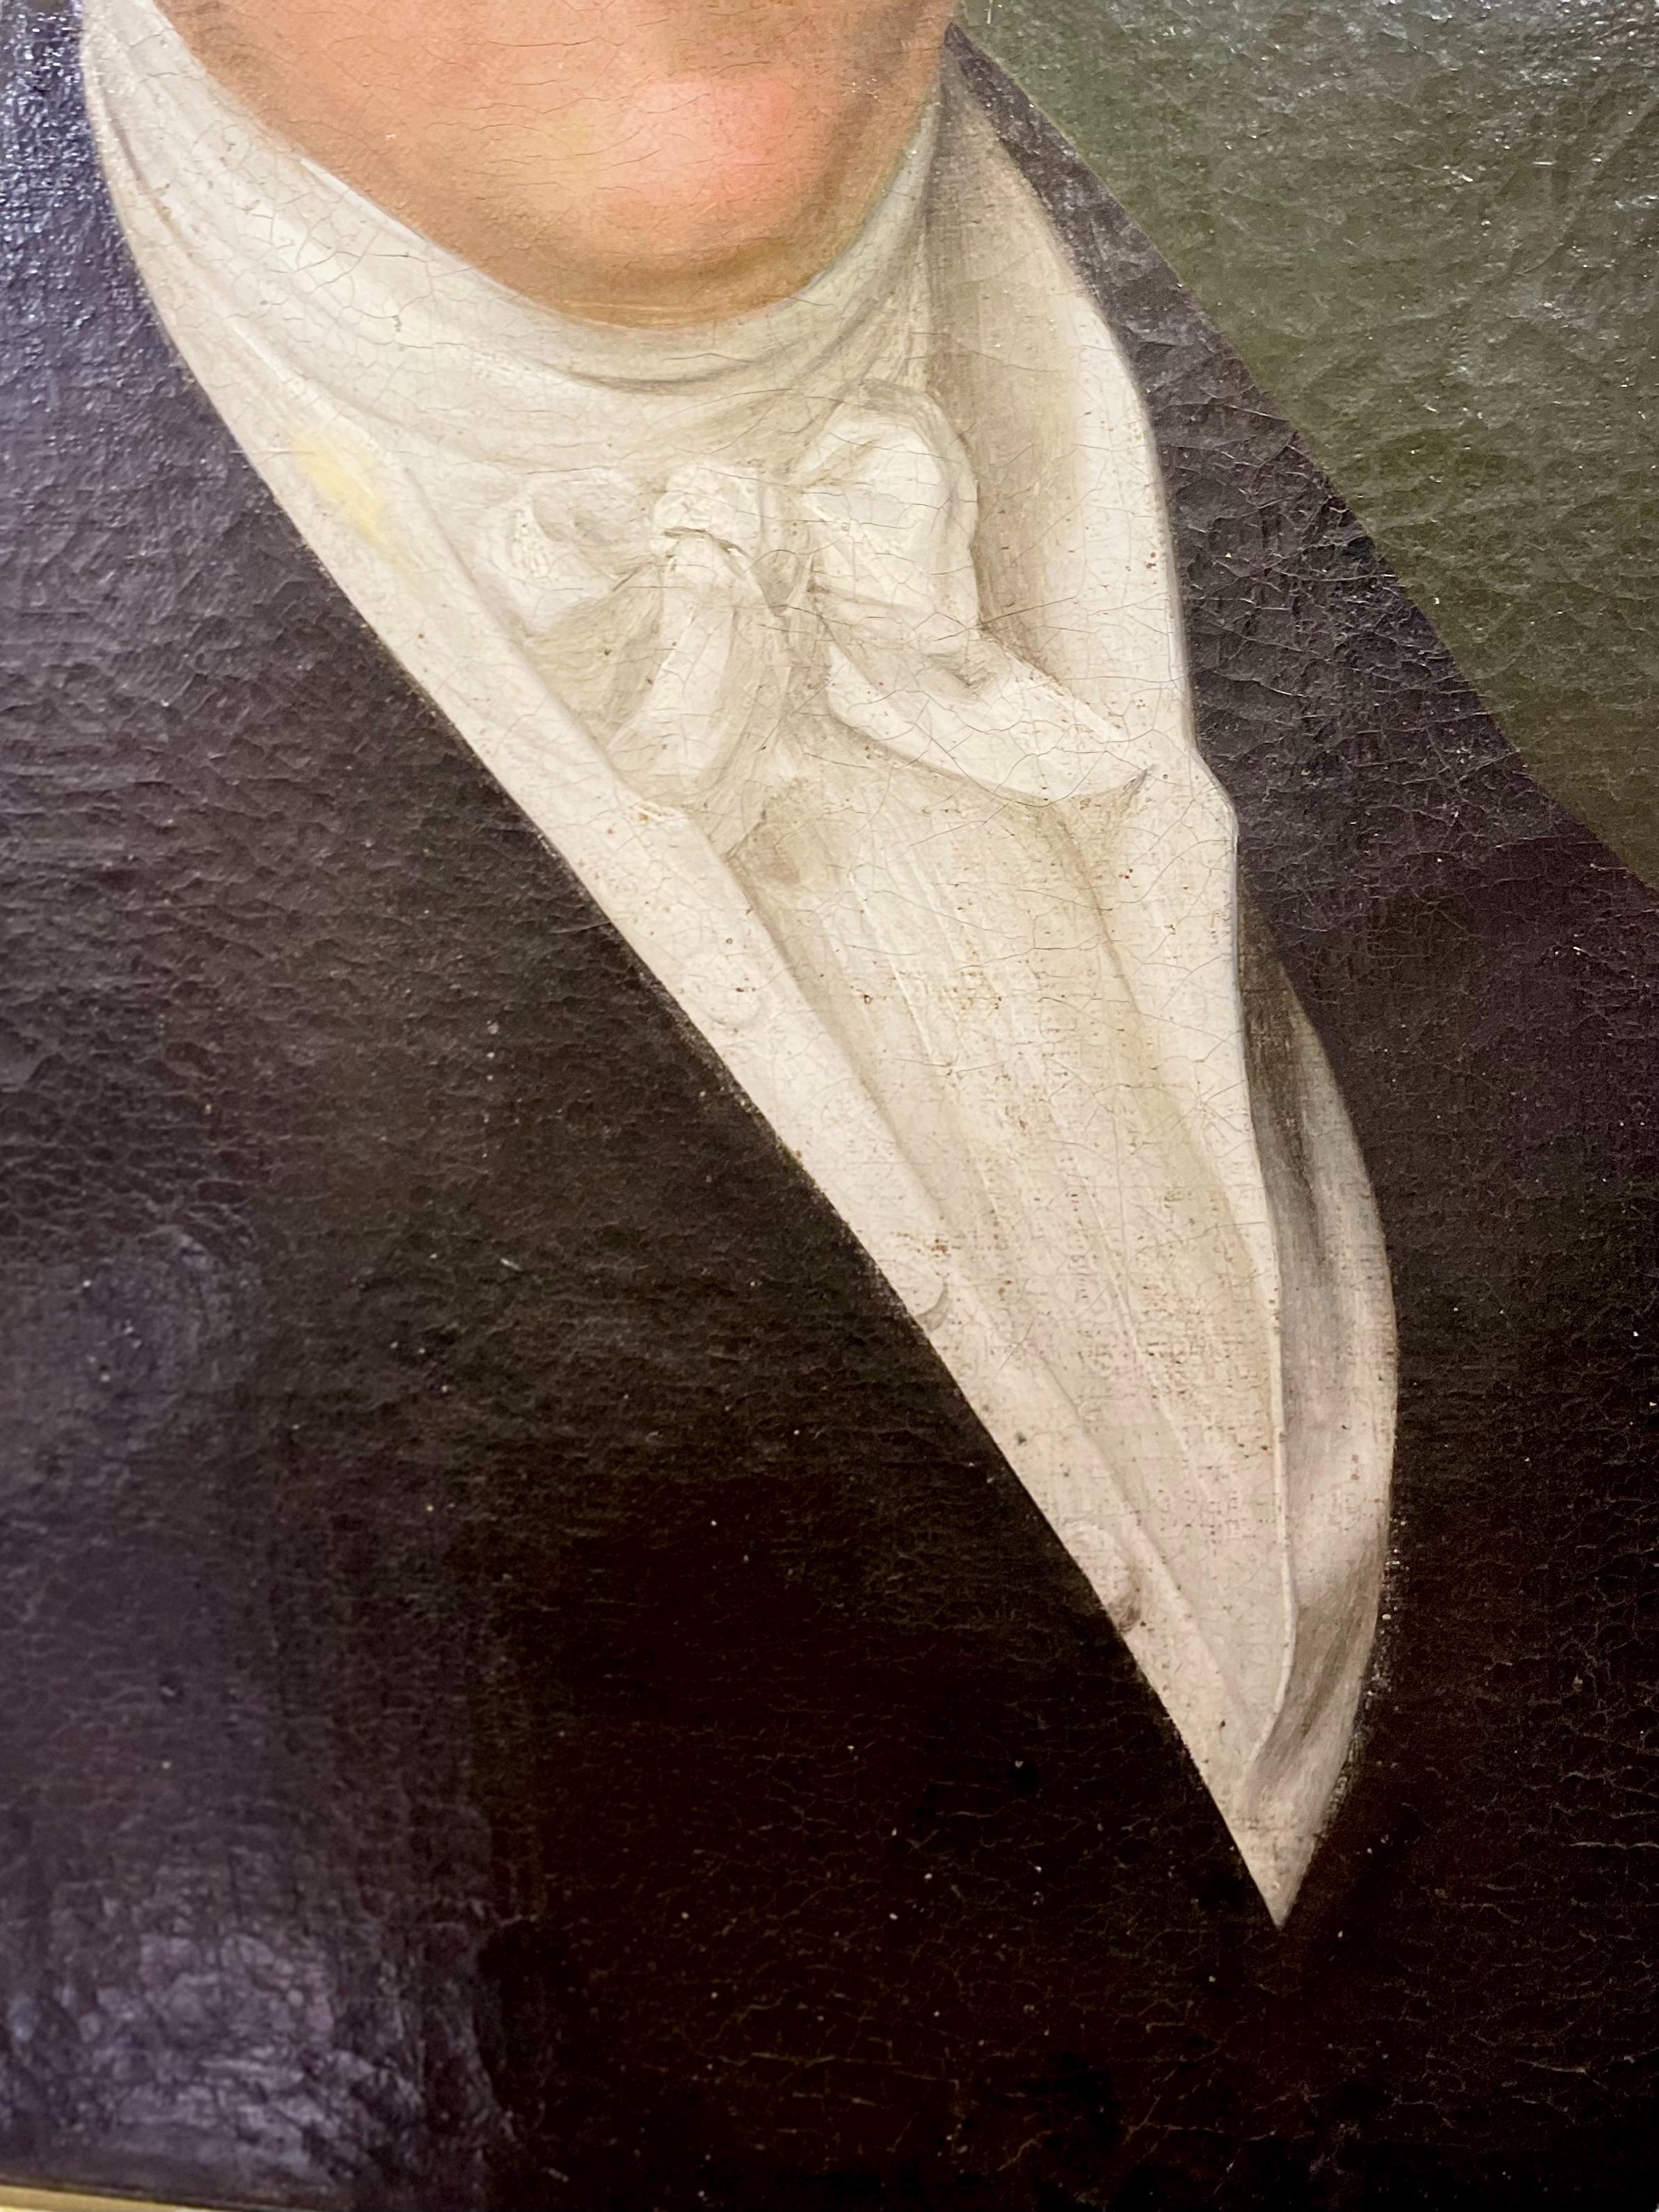 Hand-Painted 19th Century French Oil on Canvas “Portrait of a Man in a White Shirt” For Sale